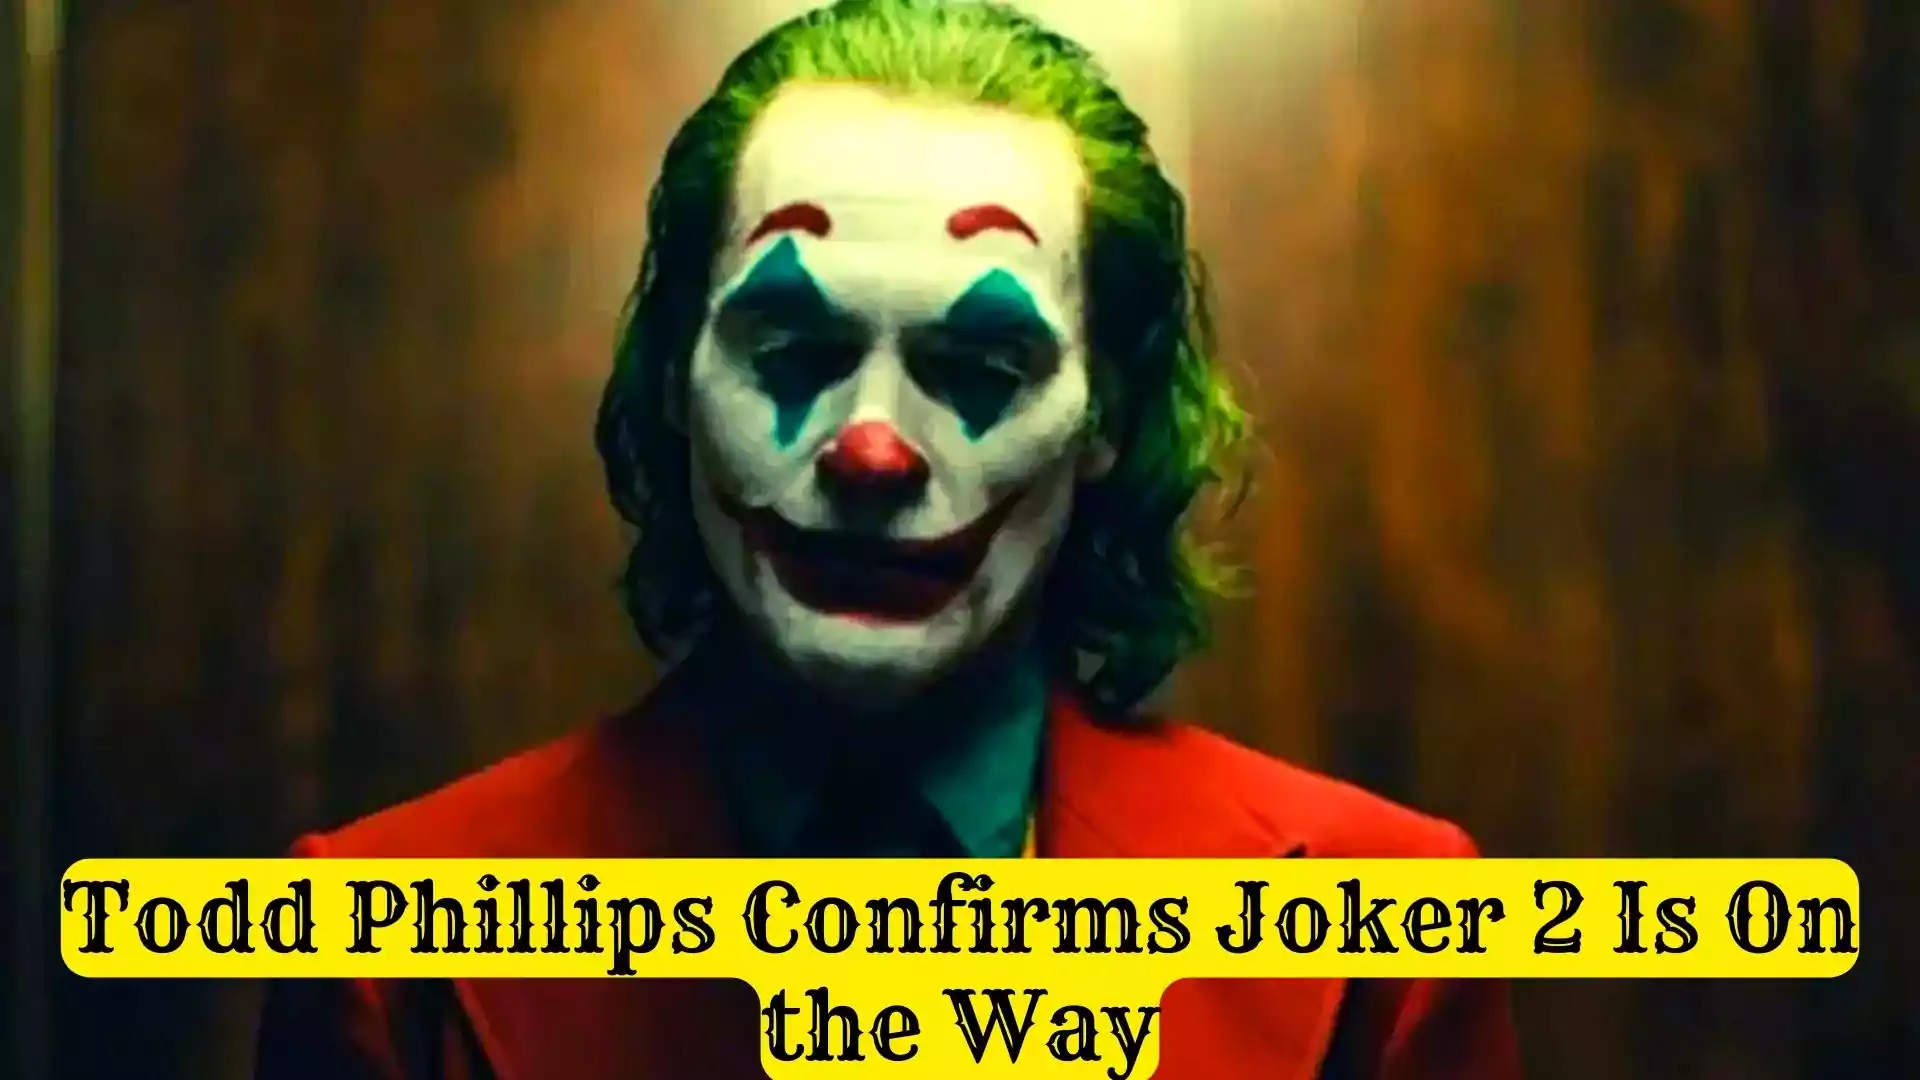 Todd Phillips Confirms Joker 2 Is On the Way